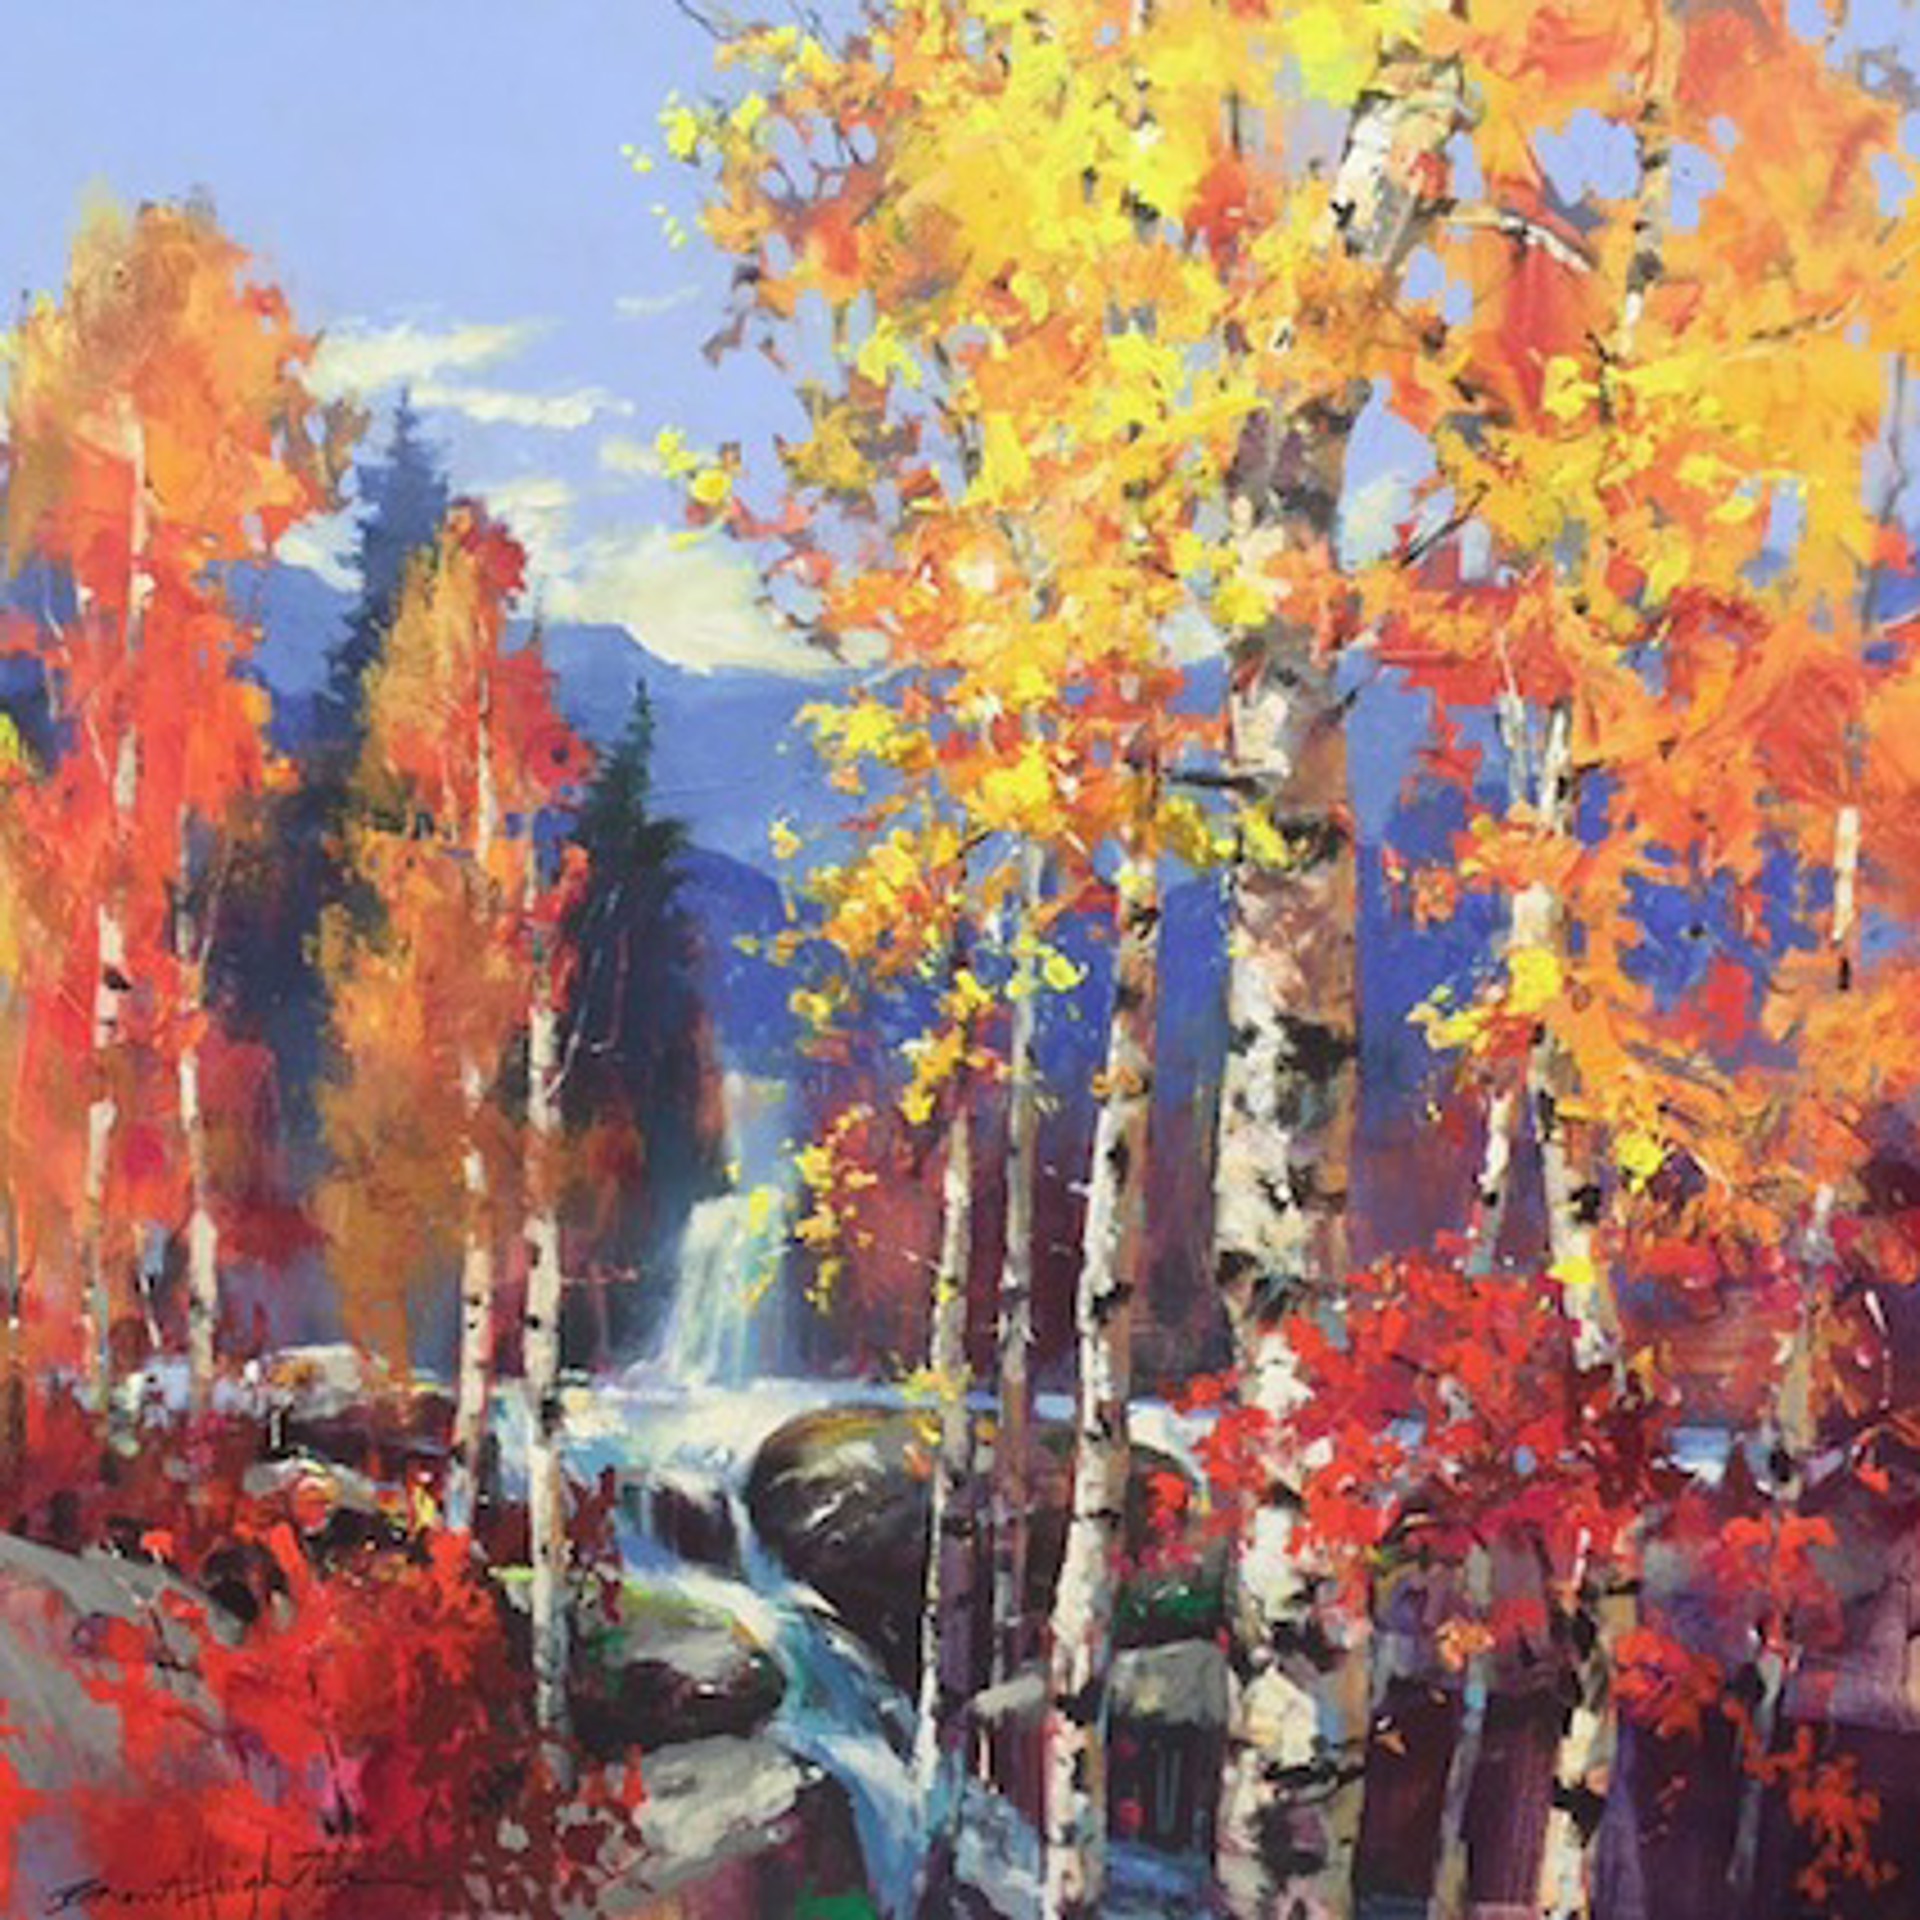 Early Fall - Birch in Full Glory by Brent Heighton